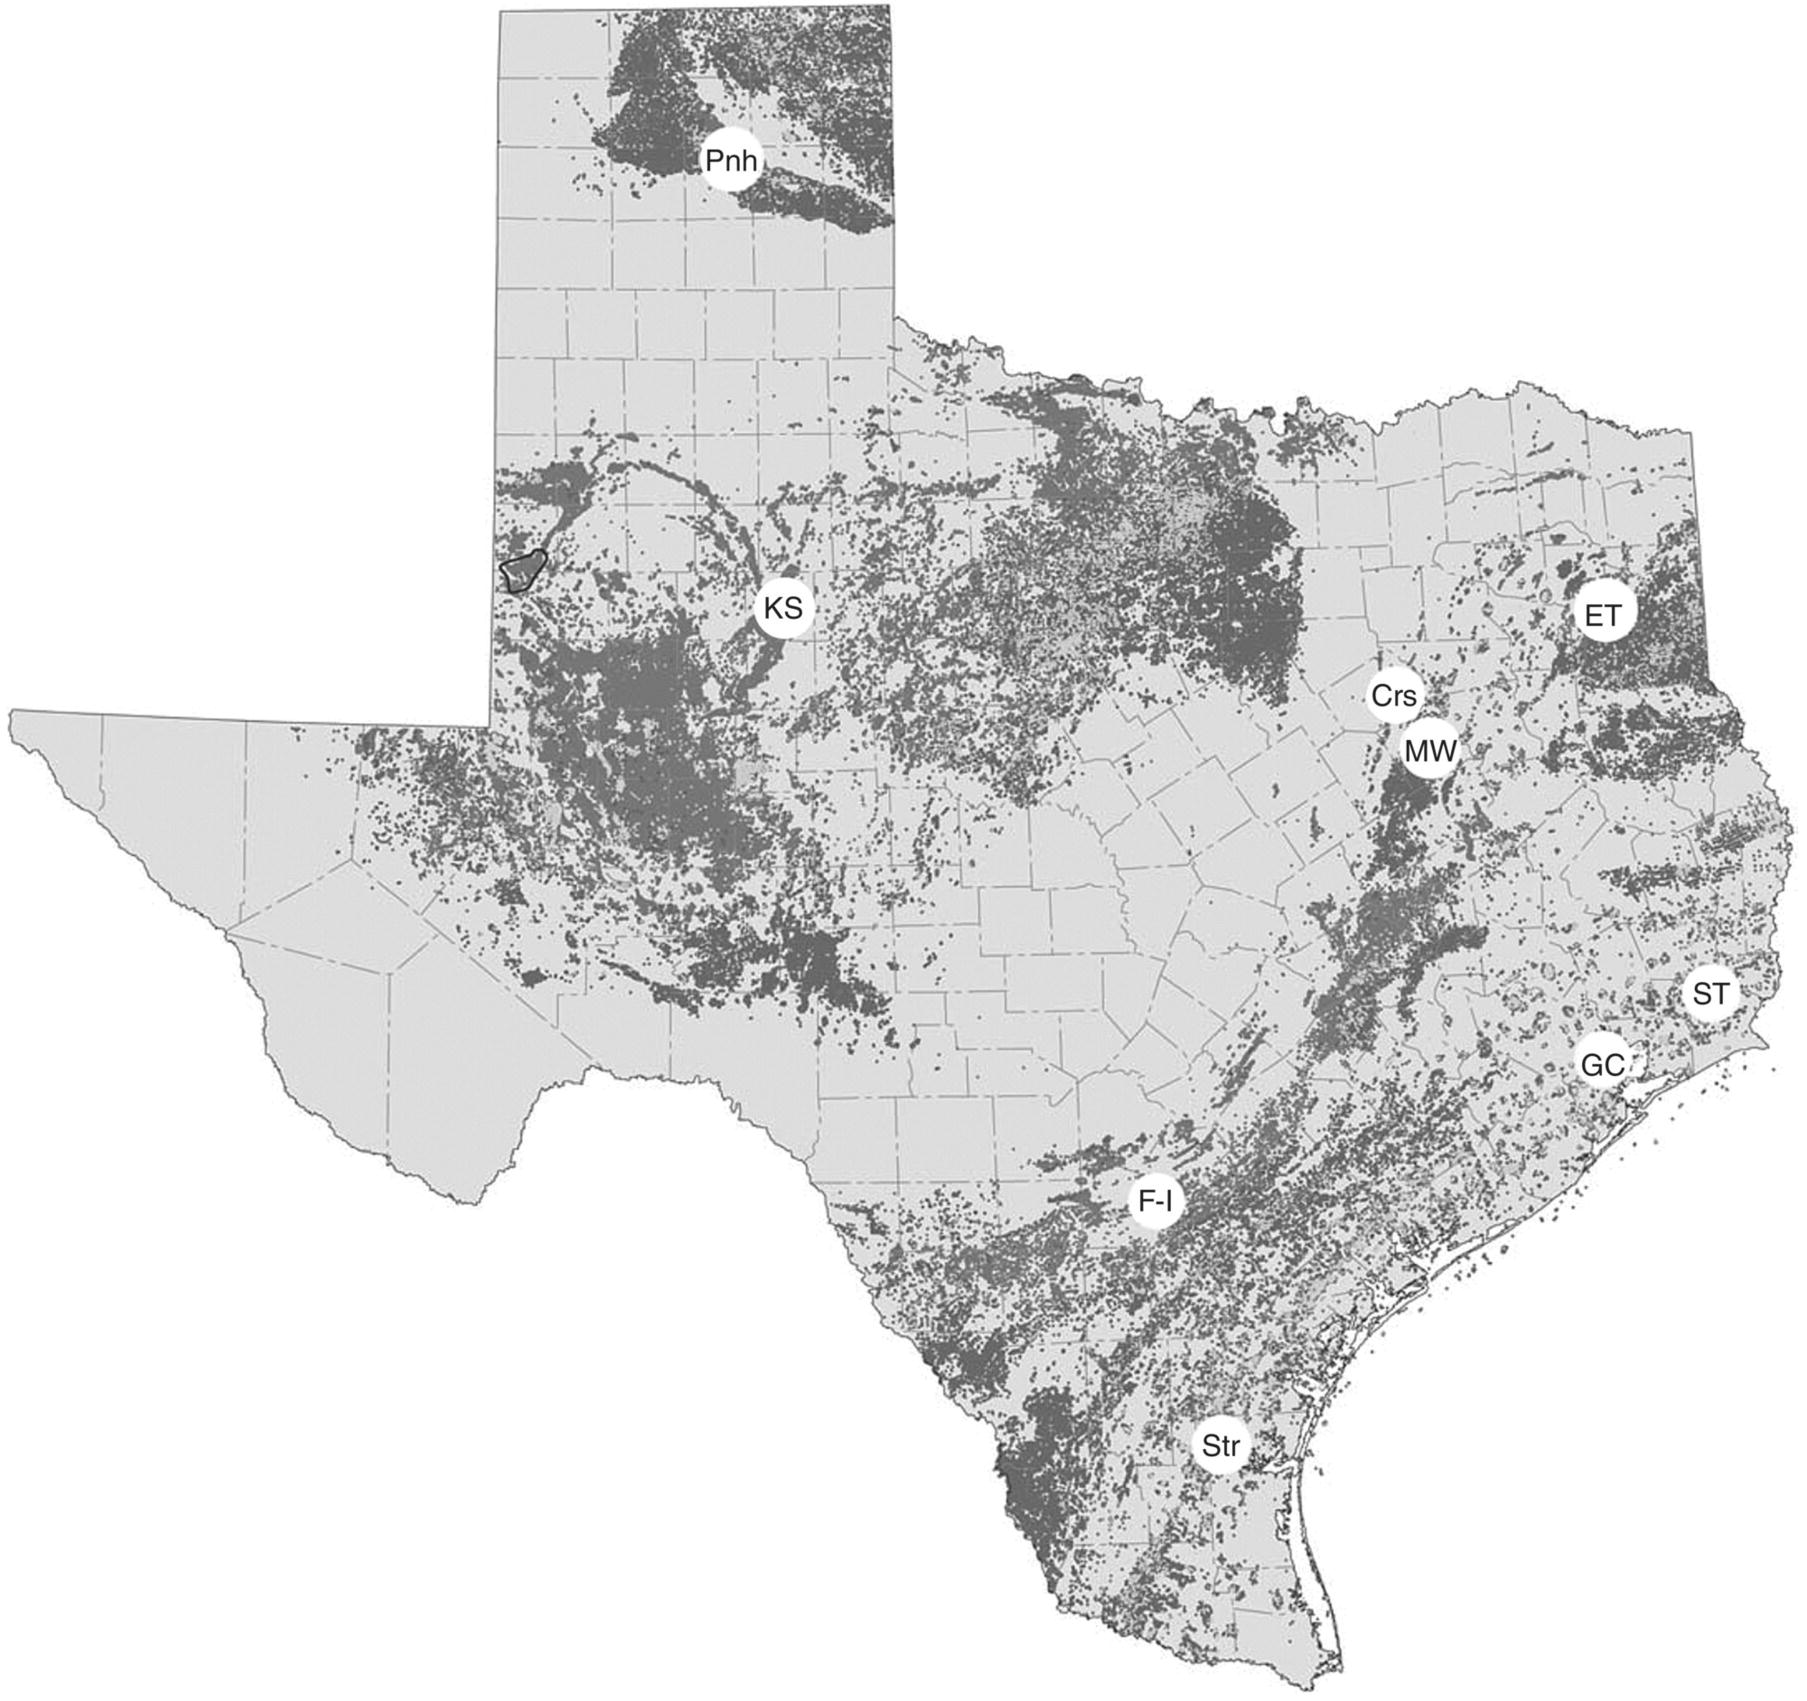 Map depicting the distribution of oil and gas wells throughout Texas with historically significant petroleum fields labeled Crs, ET, F–I, GC, KS, MW, Pnh, ST, and Str.